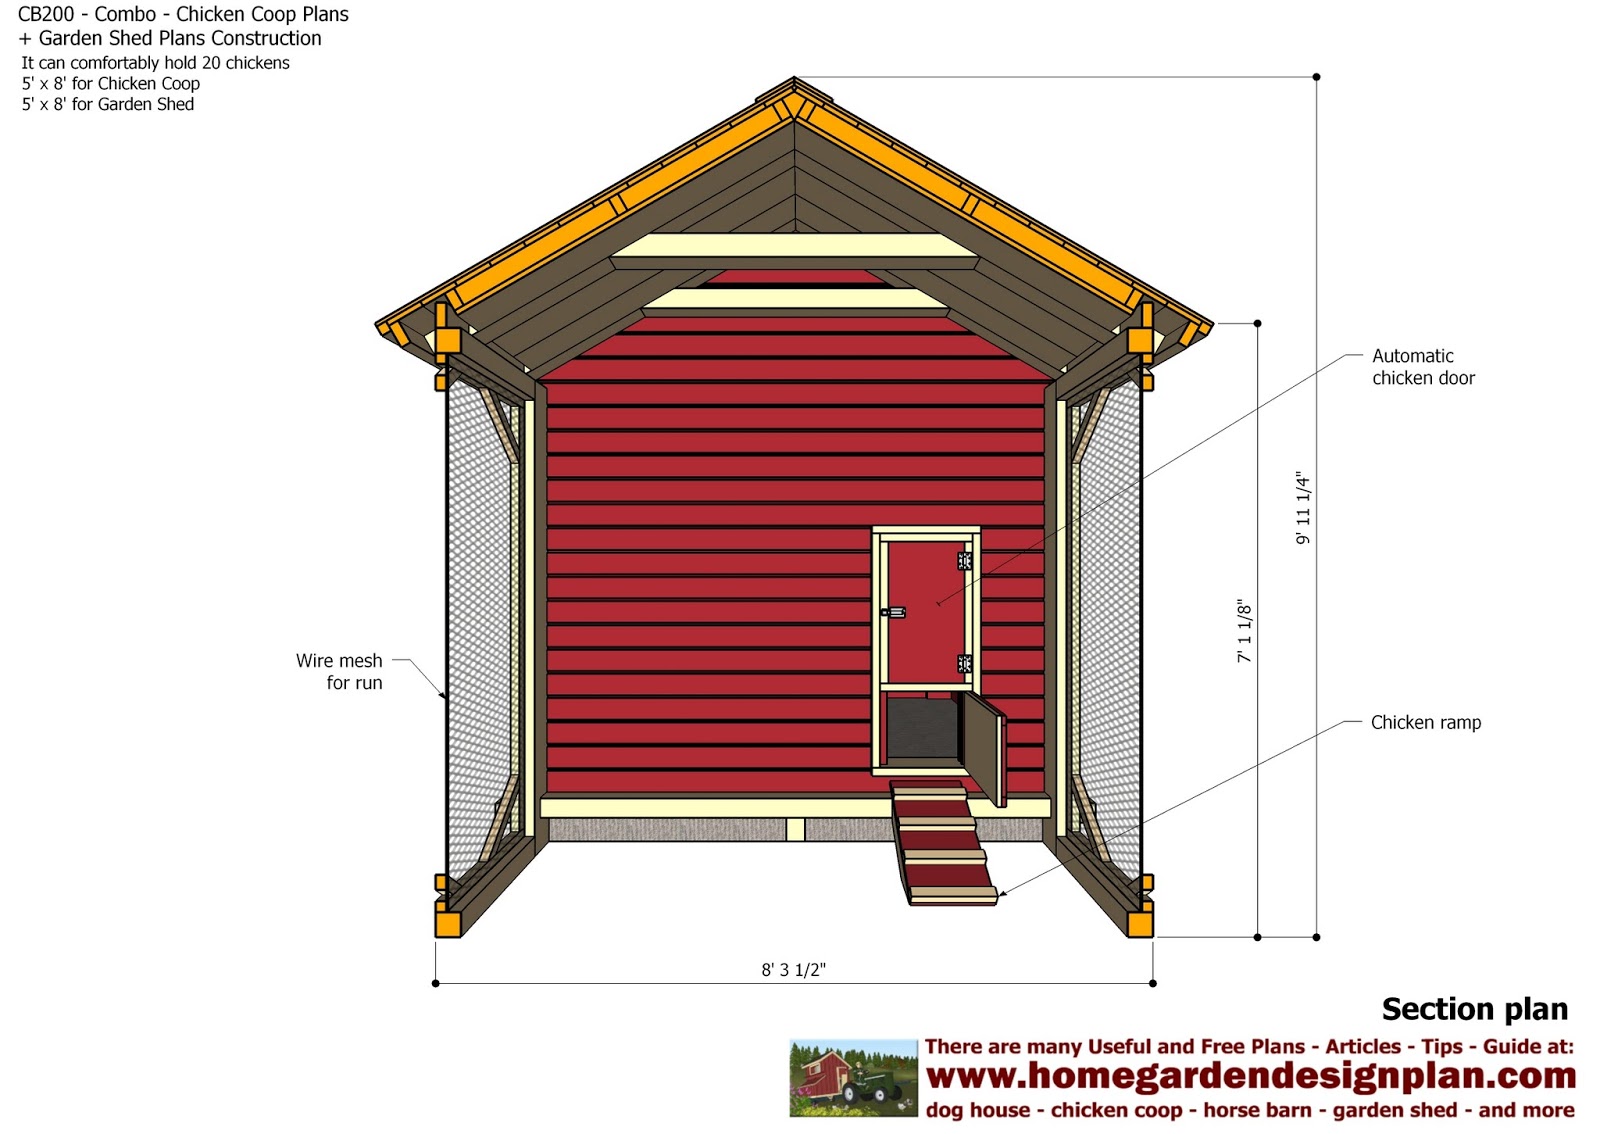 Rapo: Complete Payment plans for sheds